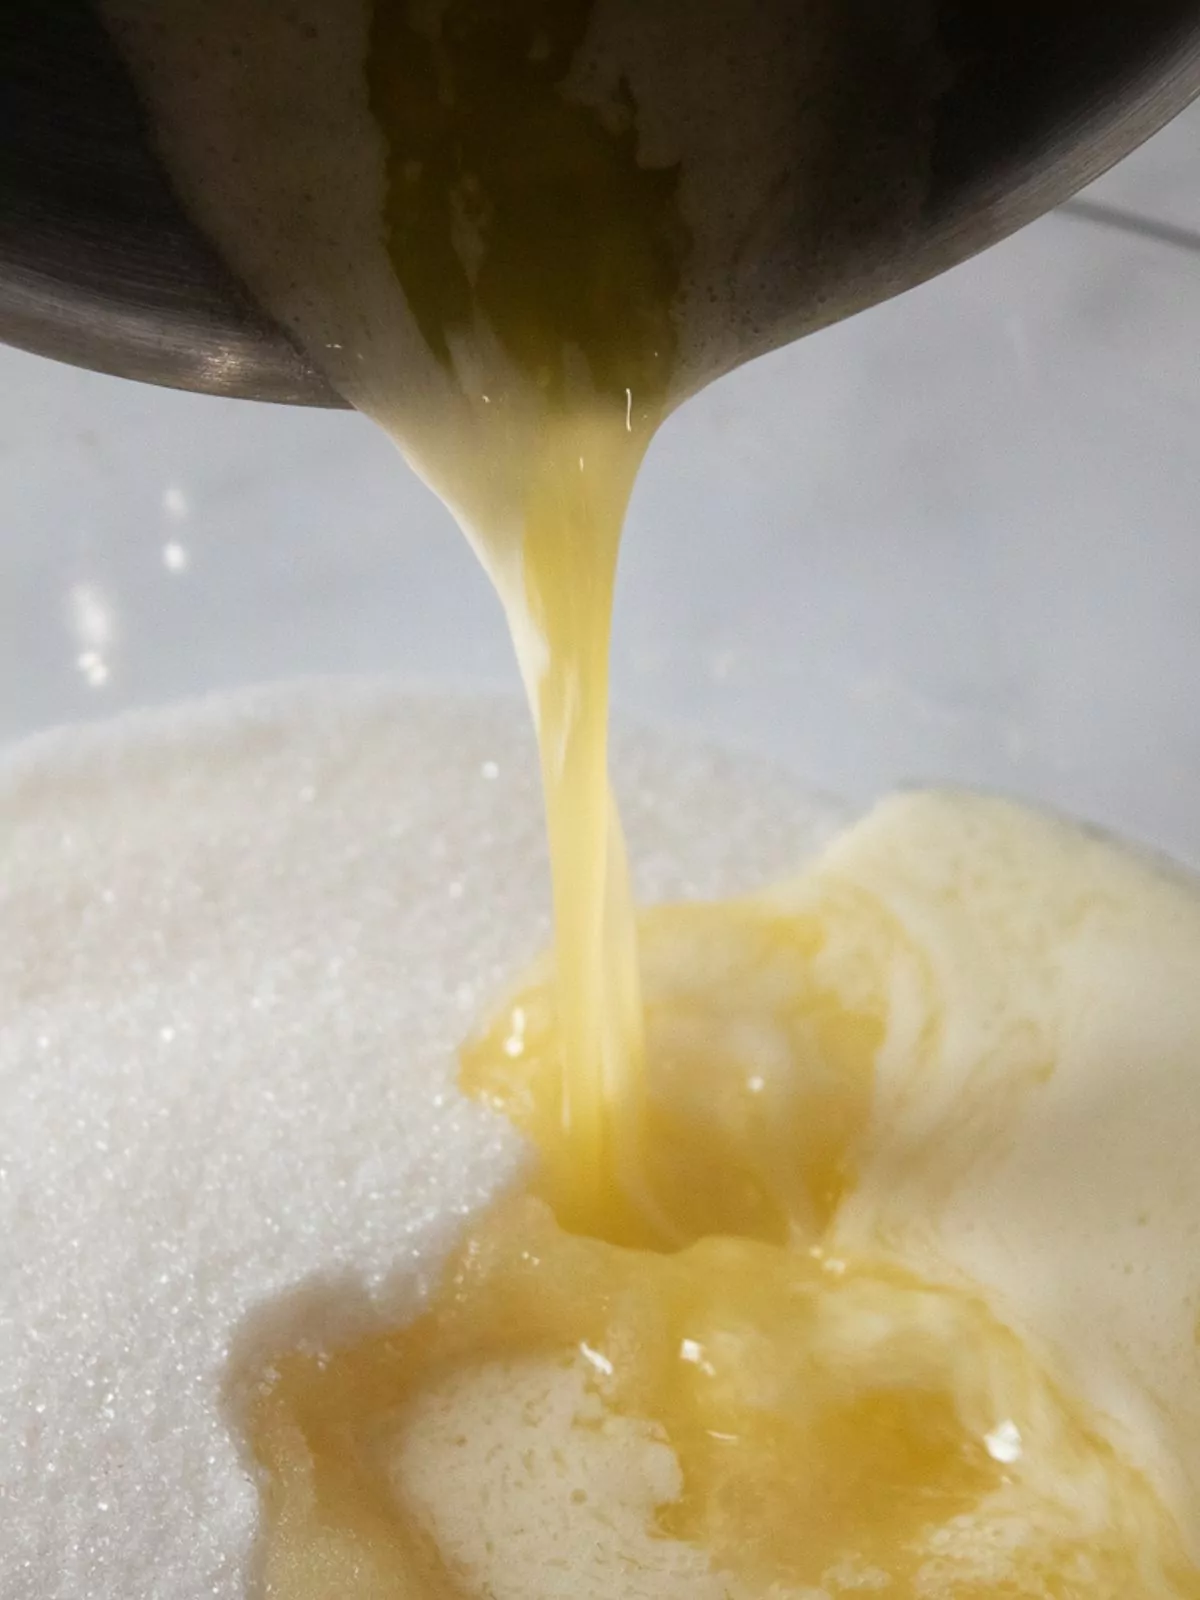 melted butter being poured in bowl of sugar.